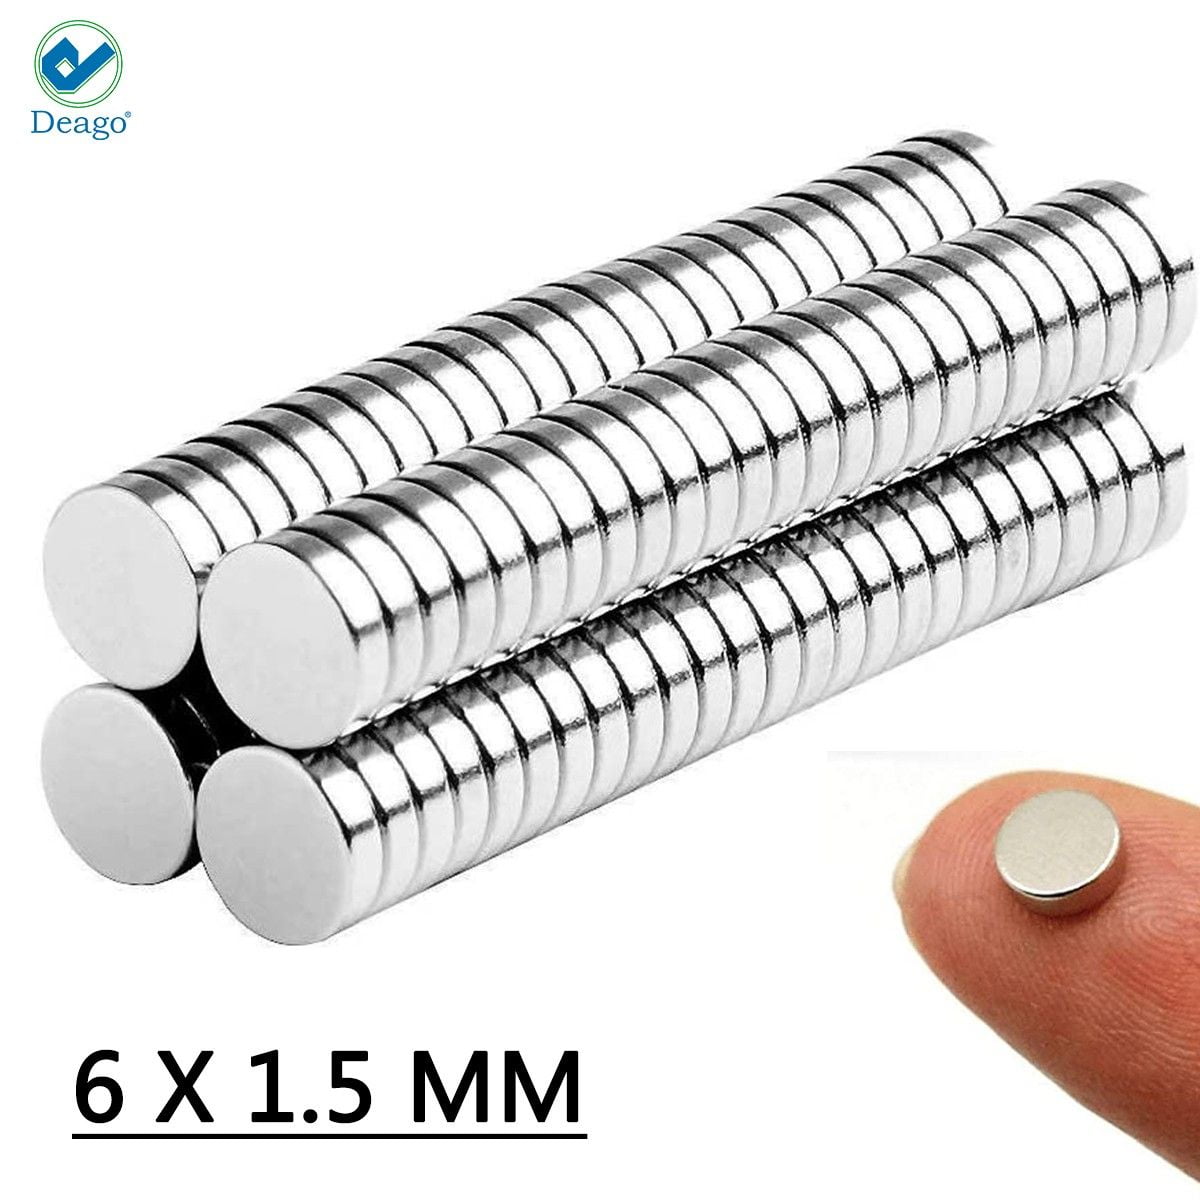 50pcs 4mm x 2mm Disc Rare Earth Neodymiums Super Strong Magnets N35 Model PERL 